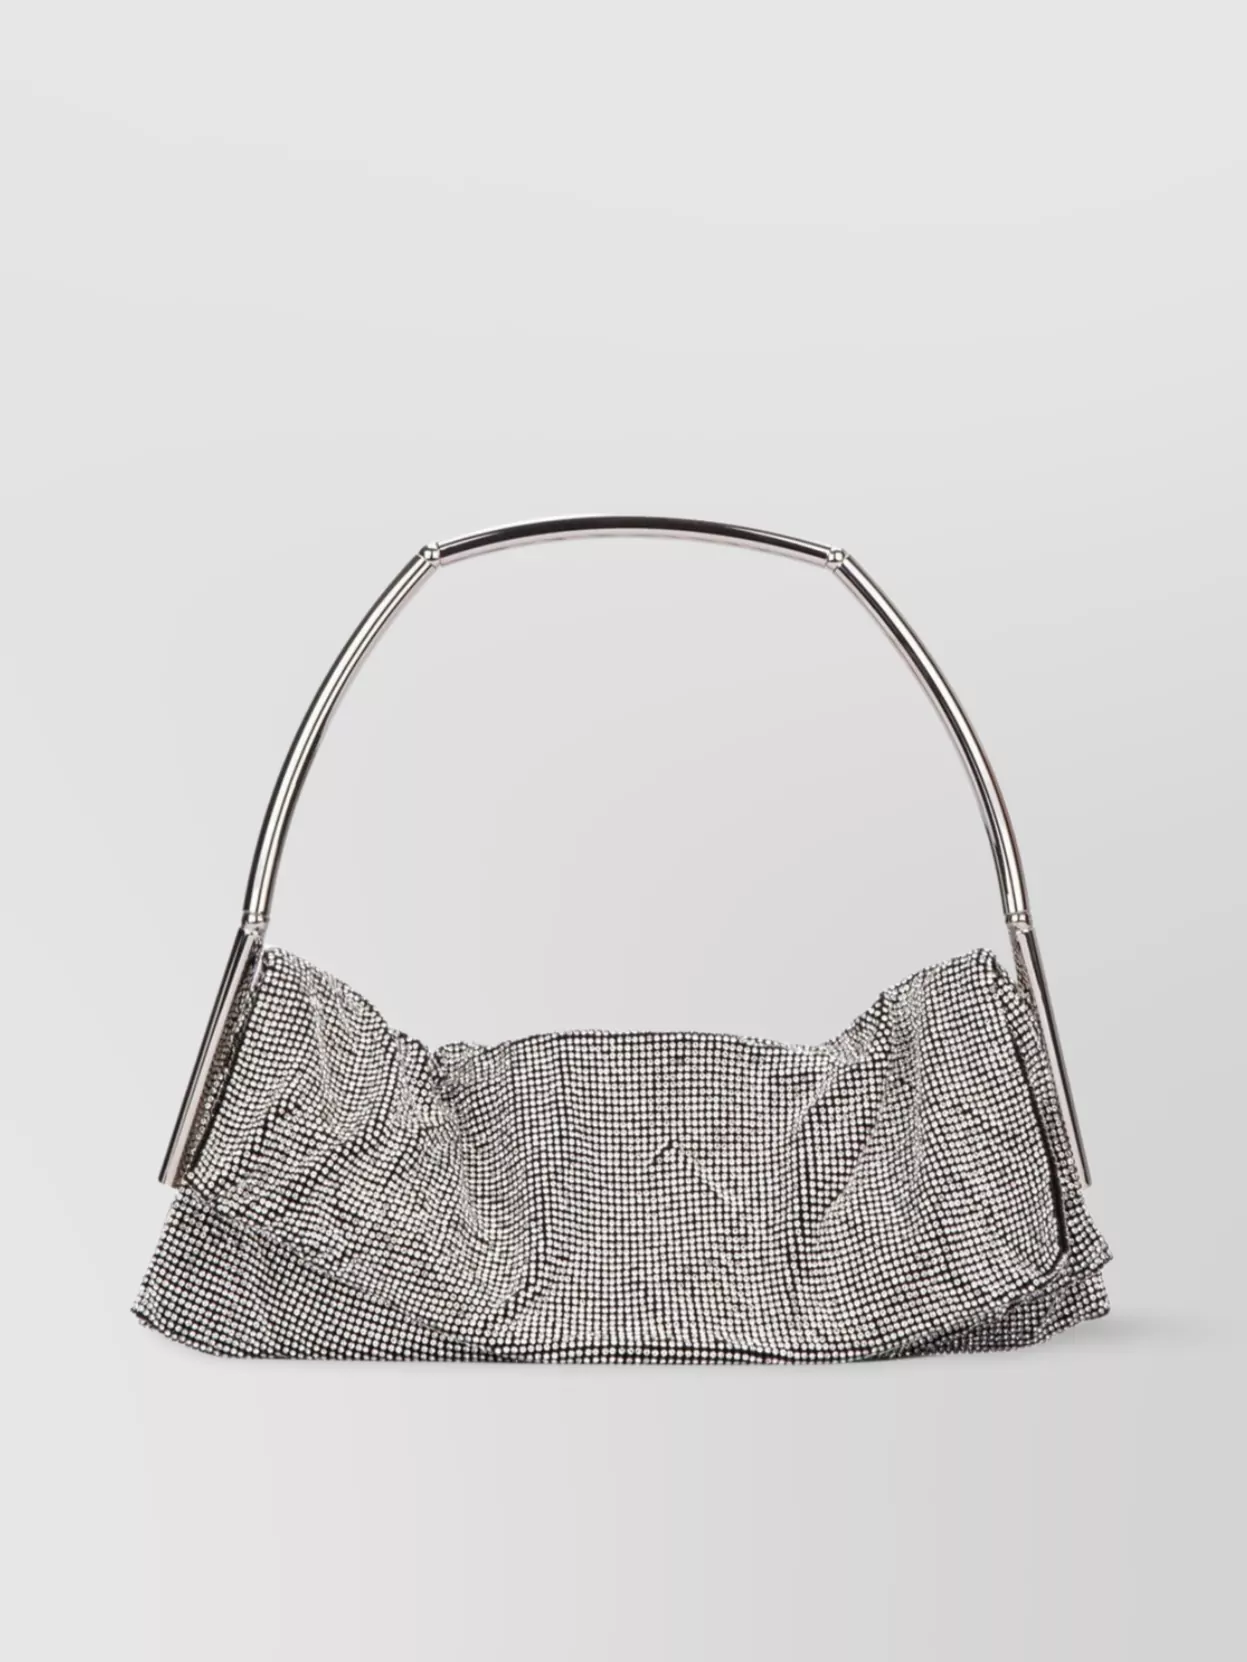 Benedetta Bruzziches Chainmail Gathered Clutch Metallic Silver Handle In Gray